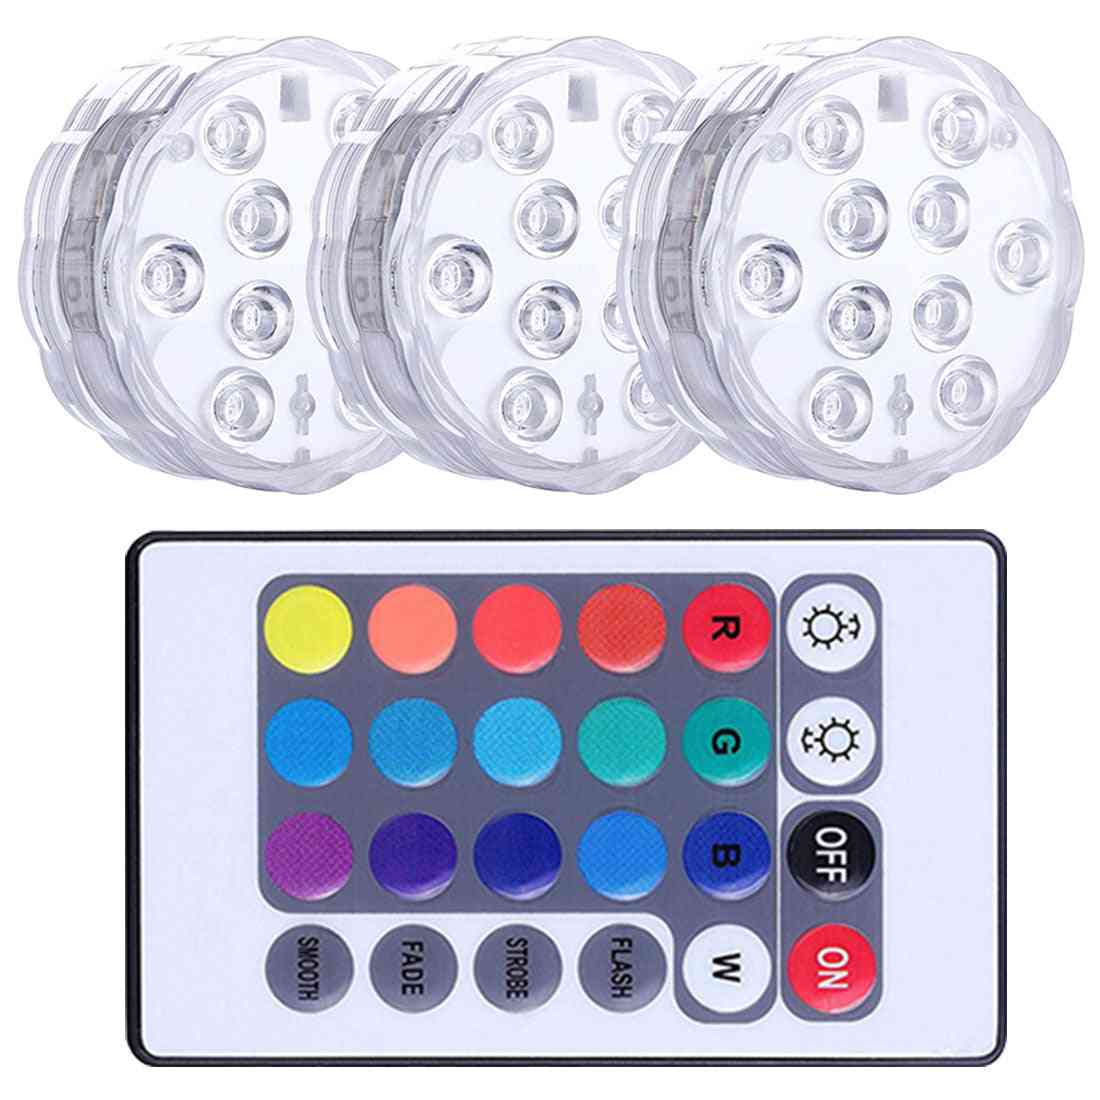 13 Led Remote Controlled Underwater Light